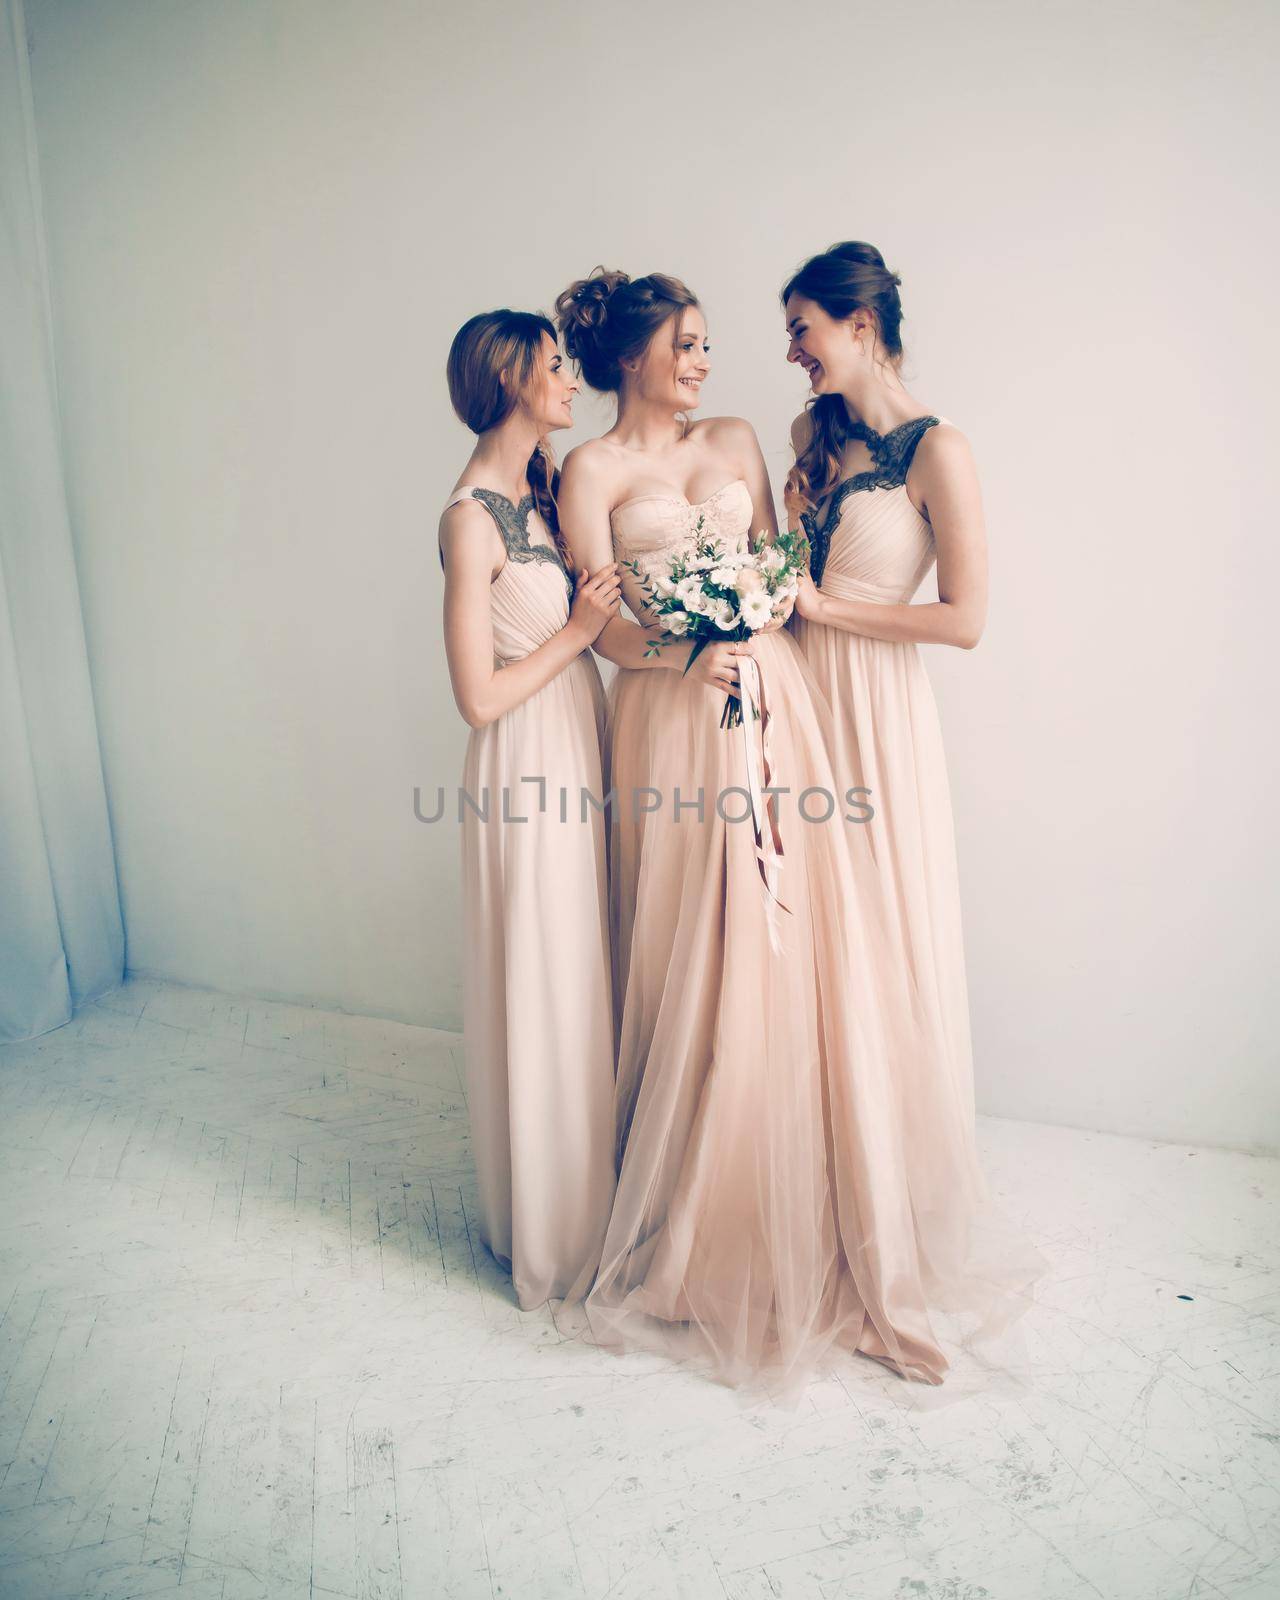 in full growth. girl bride with her friends in elegant dresses. photo with copy space